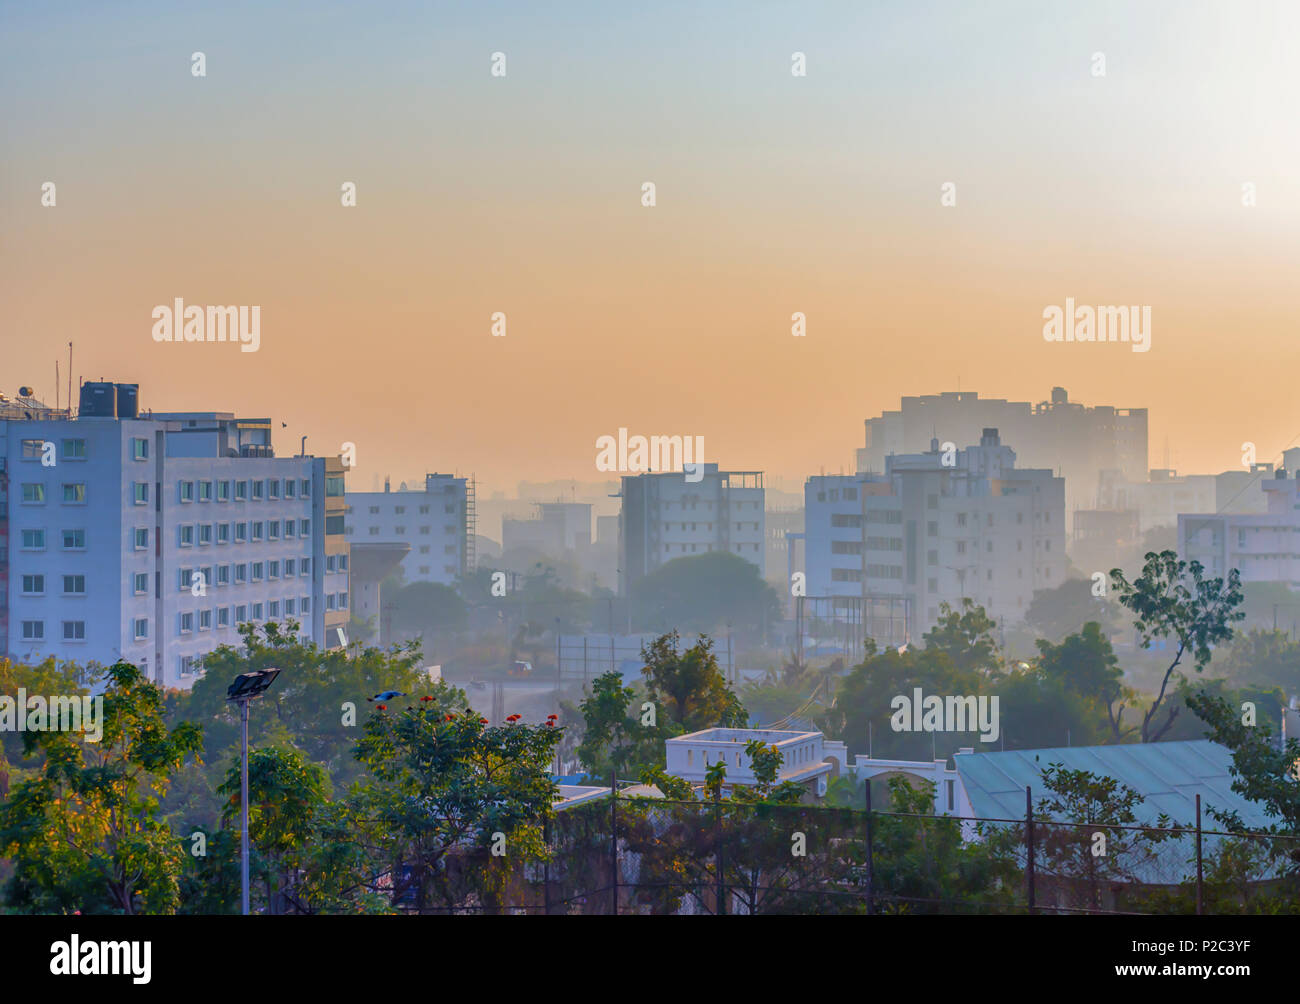 The cityscape and landscape of Kondapur and Hi-Tech city, Hyderabad, Telangana, India, under a shroud of early morning mist, late December. Stock Photo